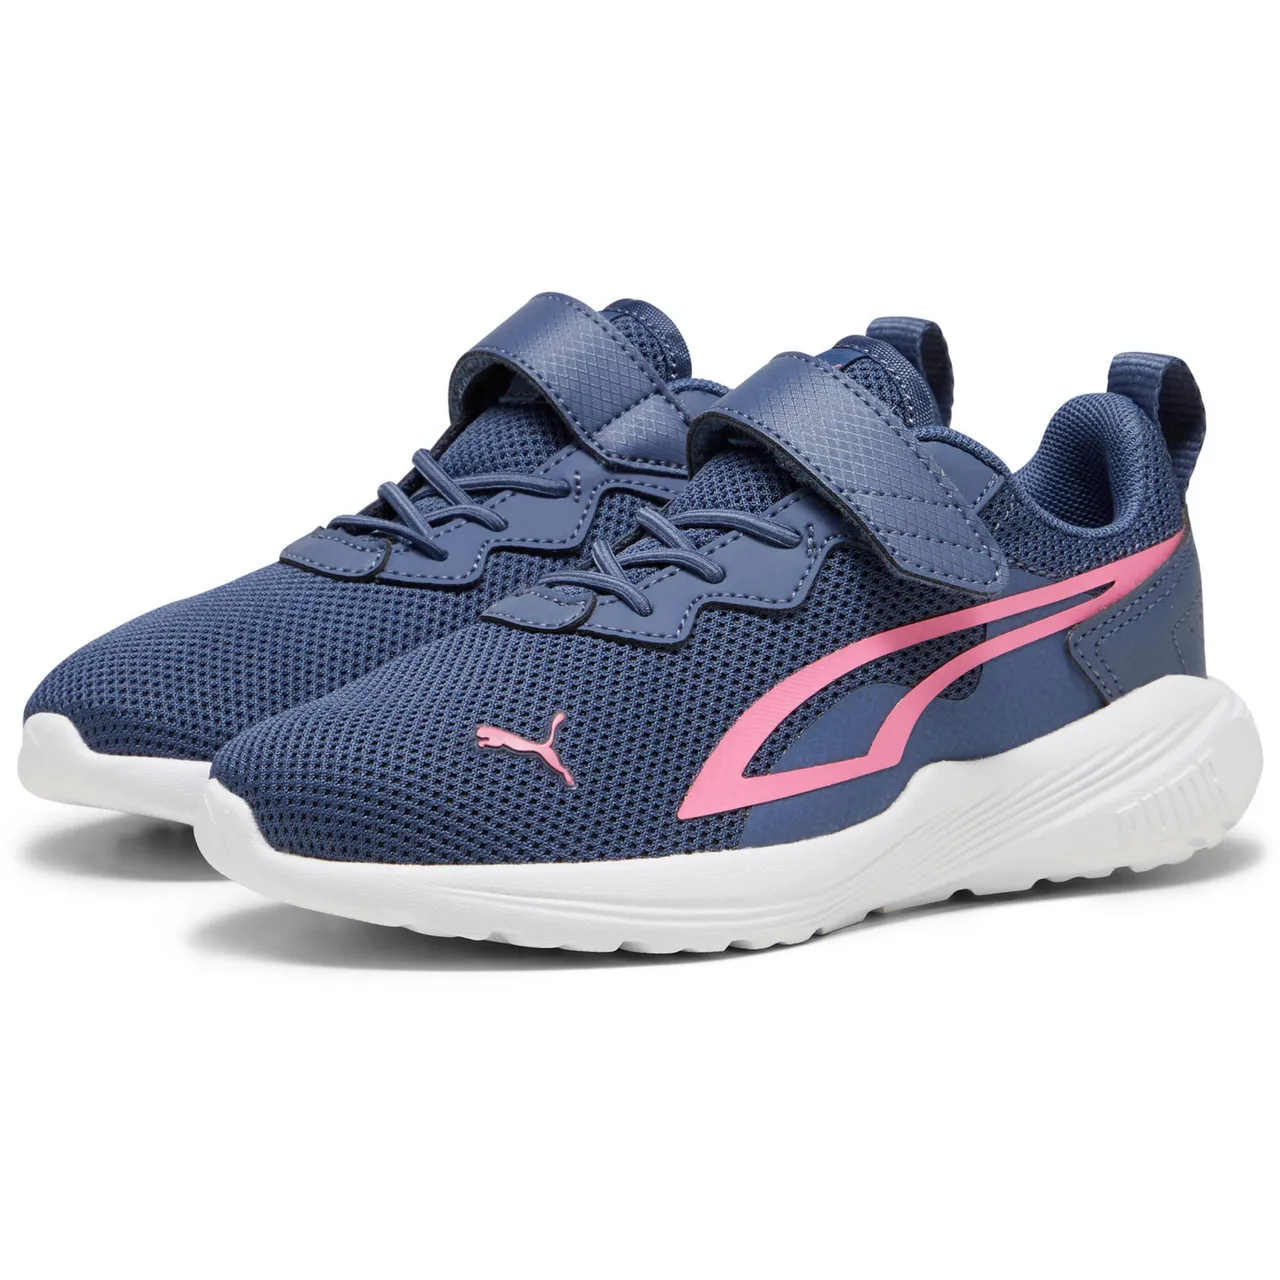 PUMA All-Day Active Fitnessschuhe Kinder